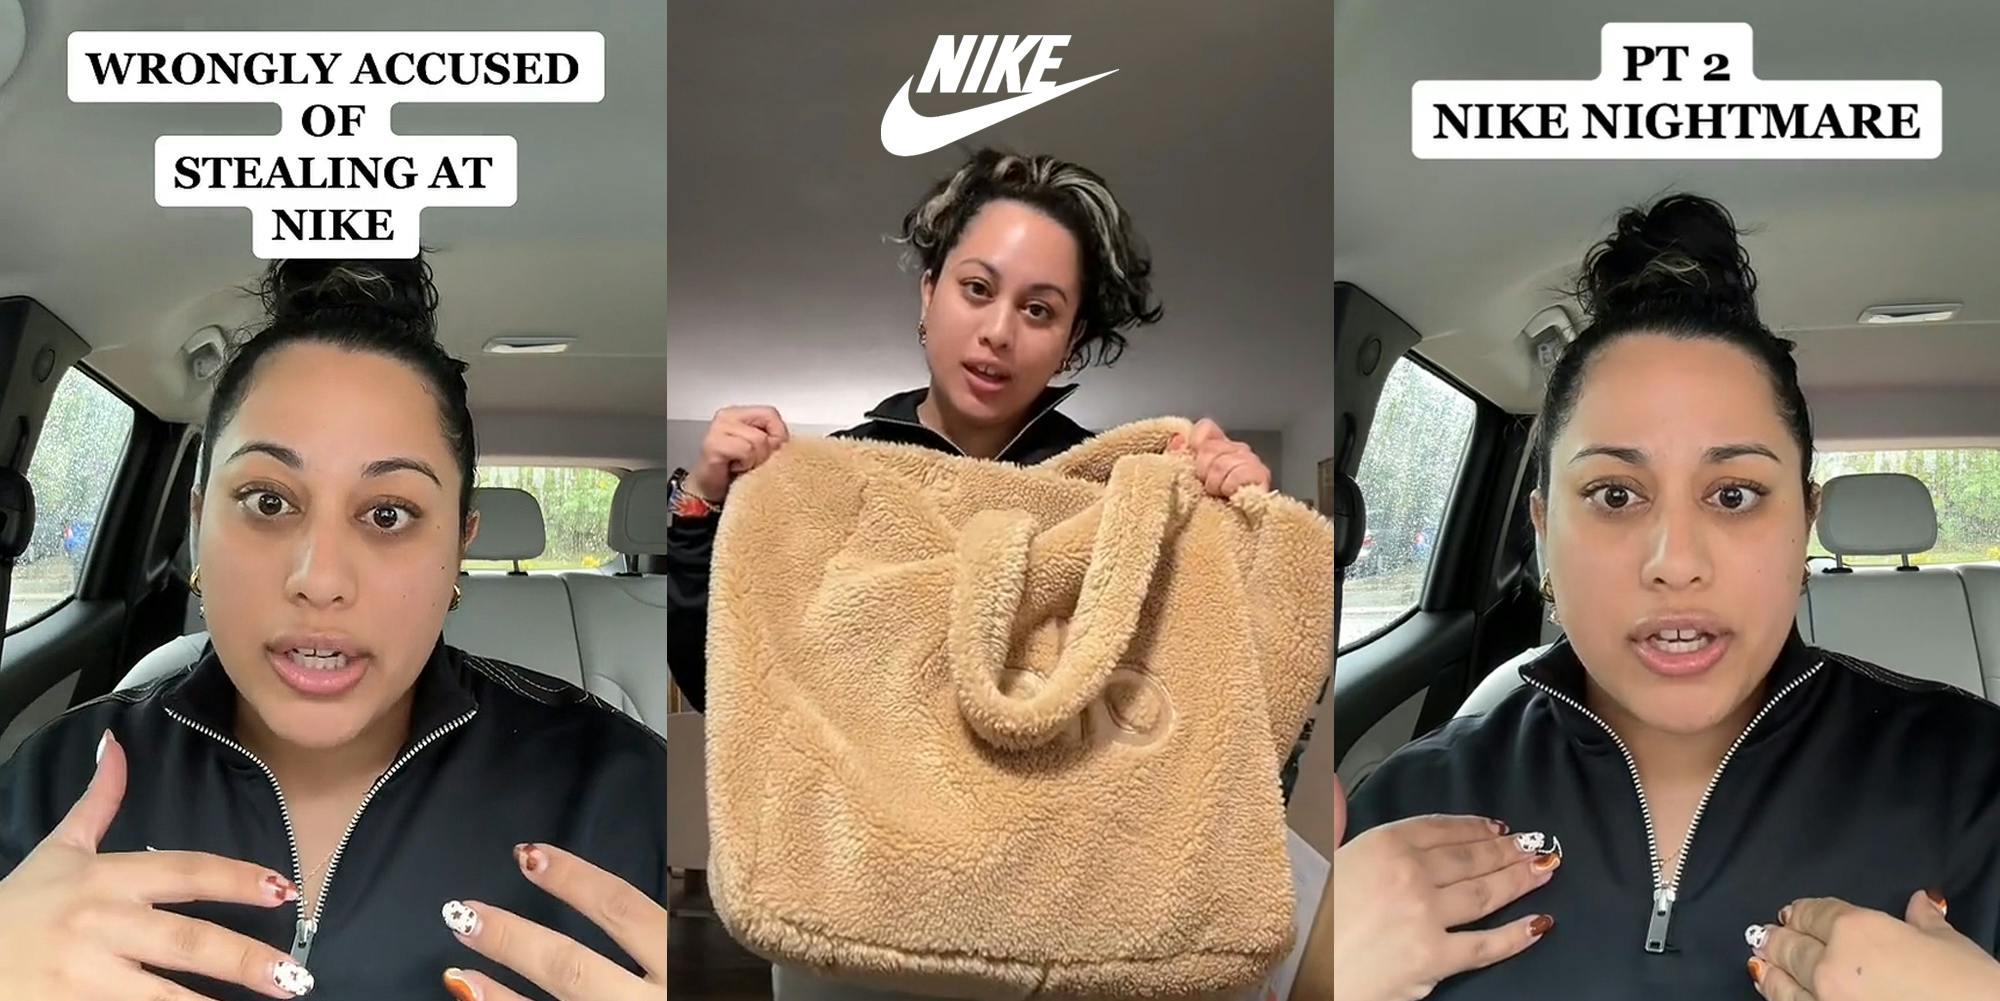 woman speaking in car caption "WRONGLY ACCUSED OF STEALING AT NIKE" (l)n woman holding up bag with Nike logo white above her head (c) woman speaking in car caption "PT 2 NIKE NIGHTMARE" (r)